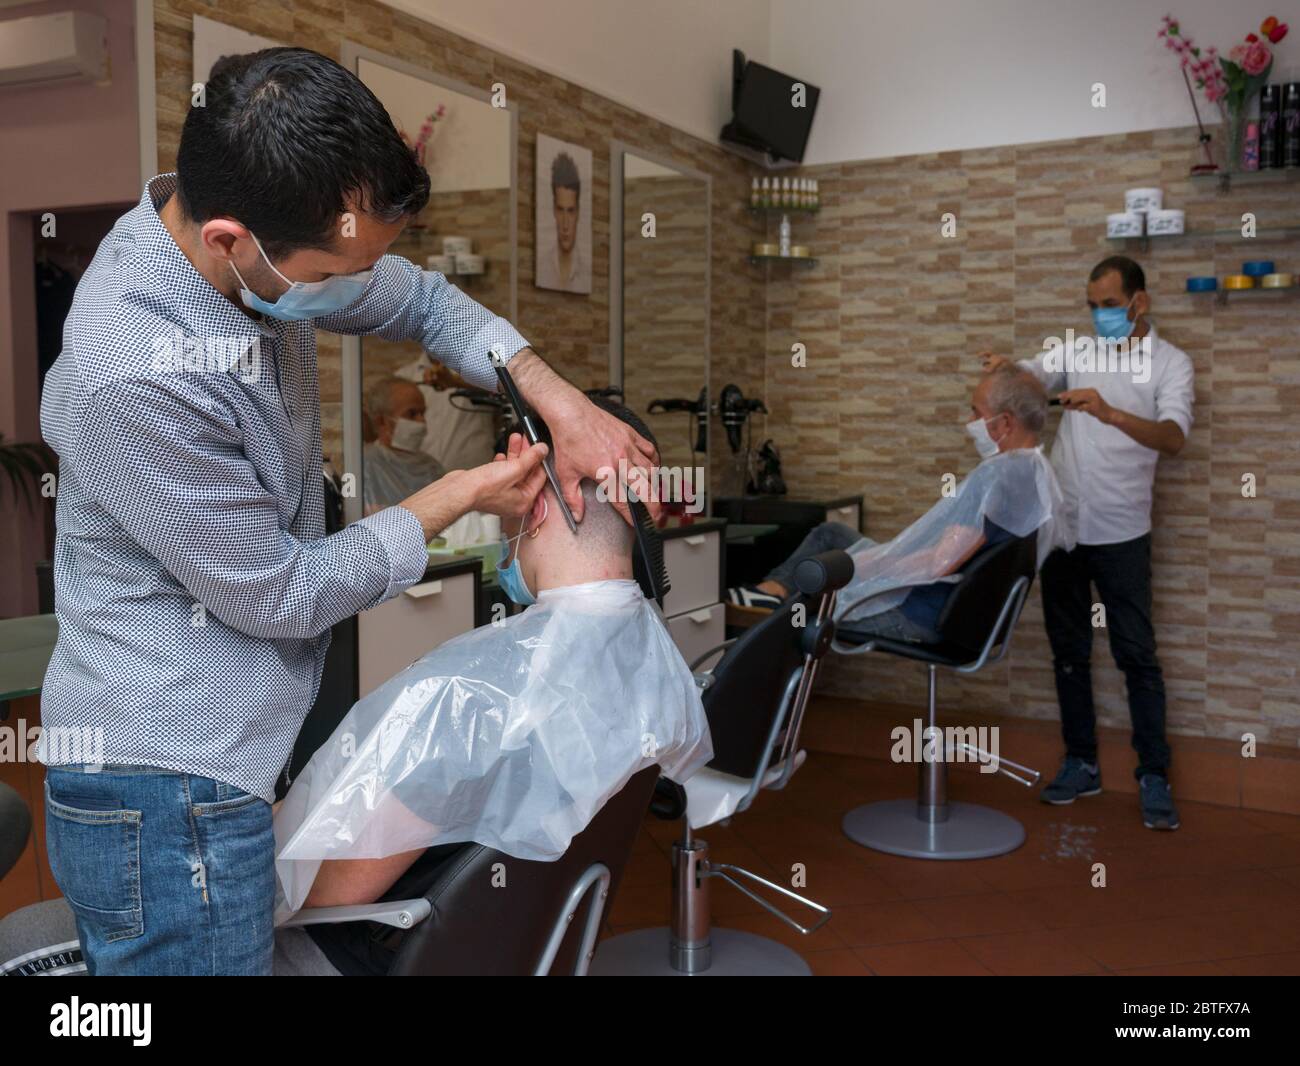 Florence, Italy - 2020, May 18: People at the barber shop get a haircut wearing protective mask, during Covid-19 lockdown. Stock Photo